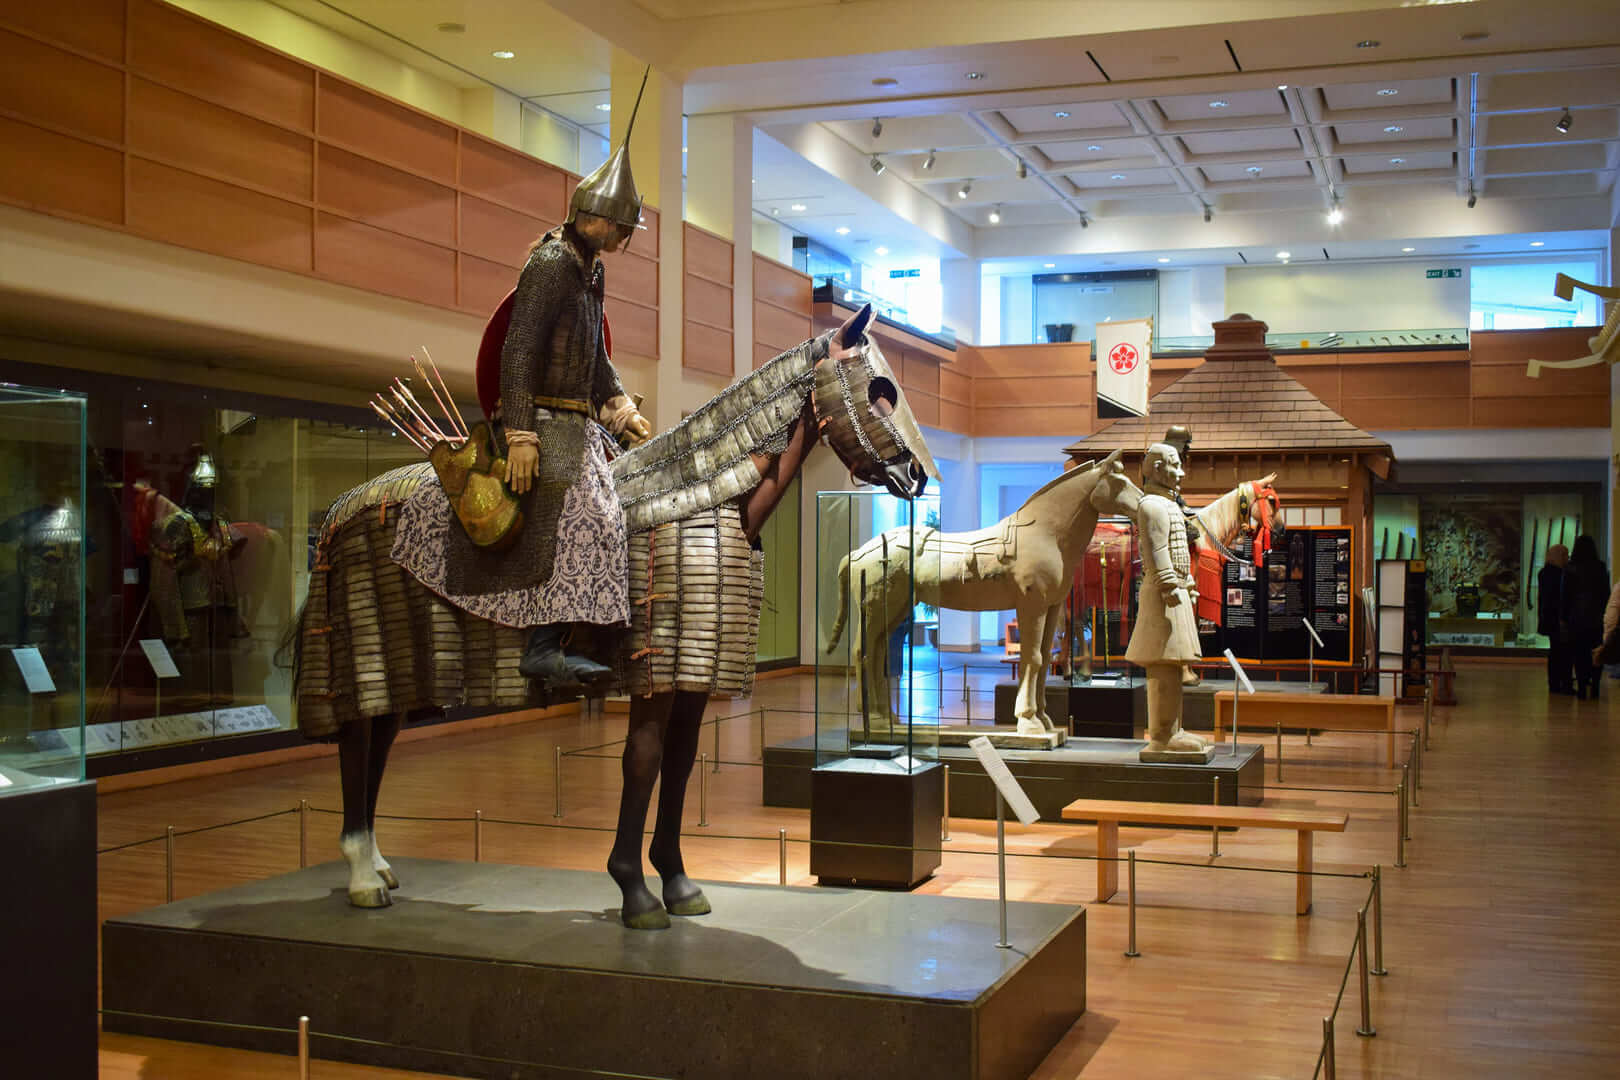 An exhibition at the Royal Armouries Museum in Leeds, the UKs national museum of arms and armour, one of the most important museums of its type in the world.